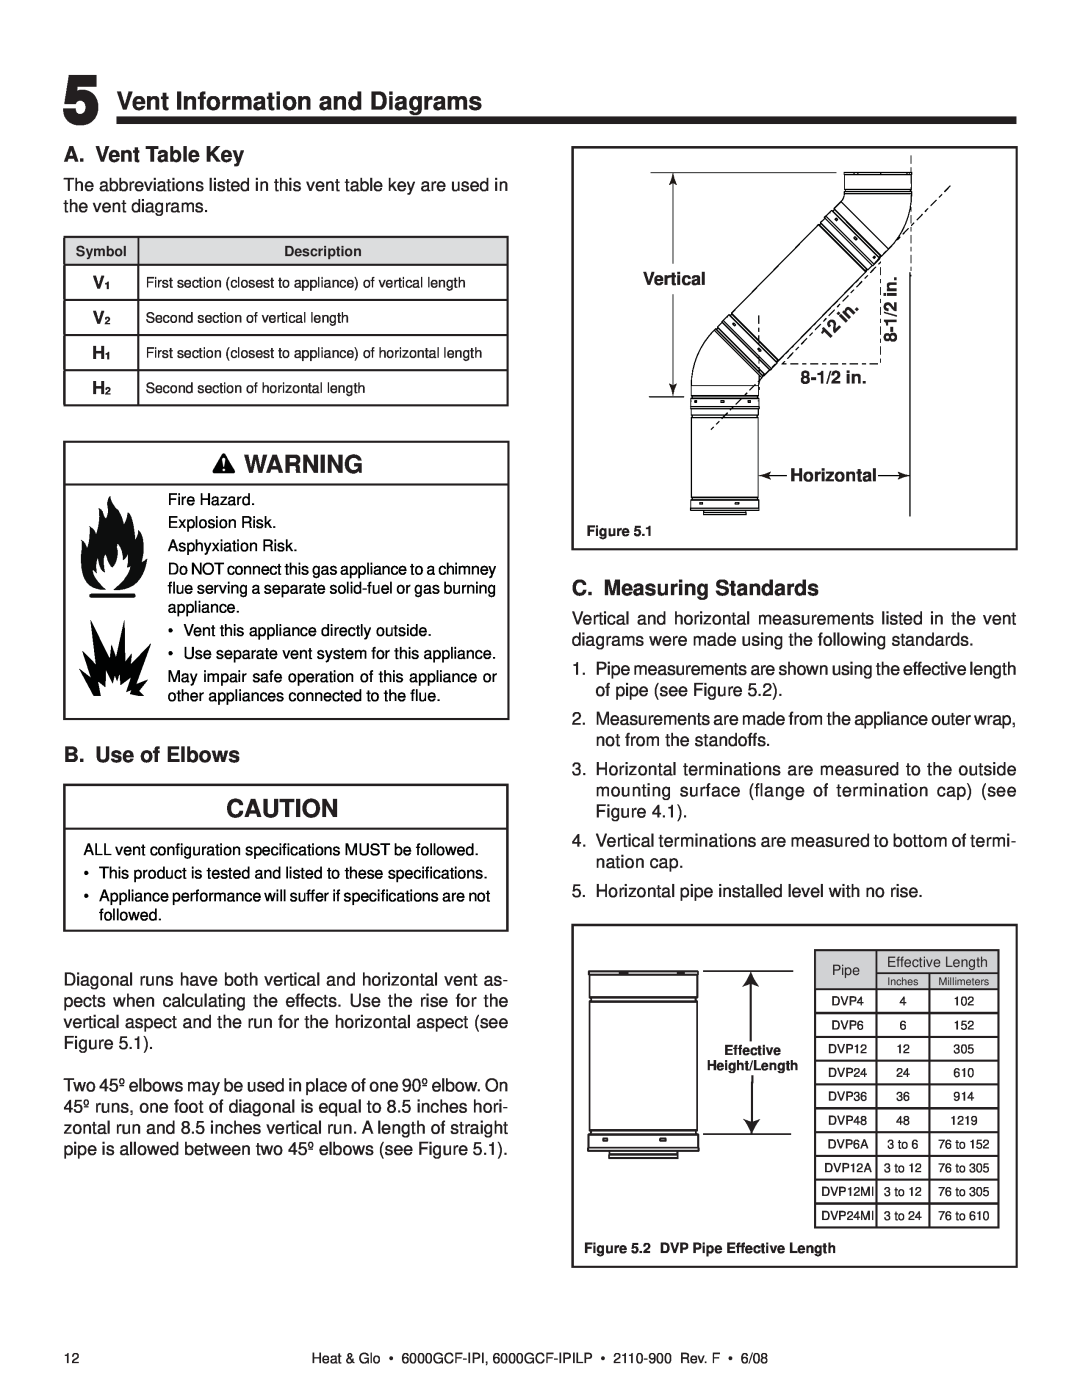 Heat & Glo LifeStyle 6000GCF-IPILP owner manual Vent Information and Diagrams, A. Vent Table Key, B. Use of Elbows 